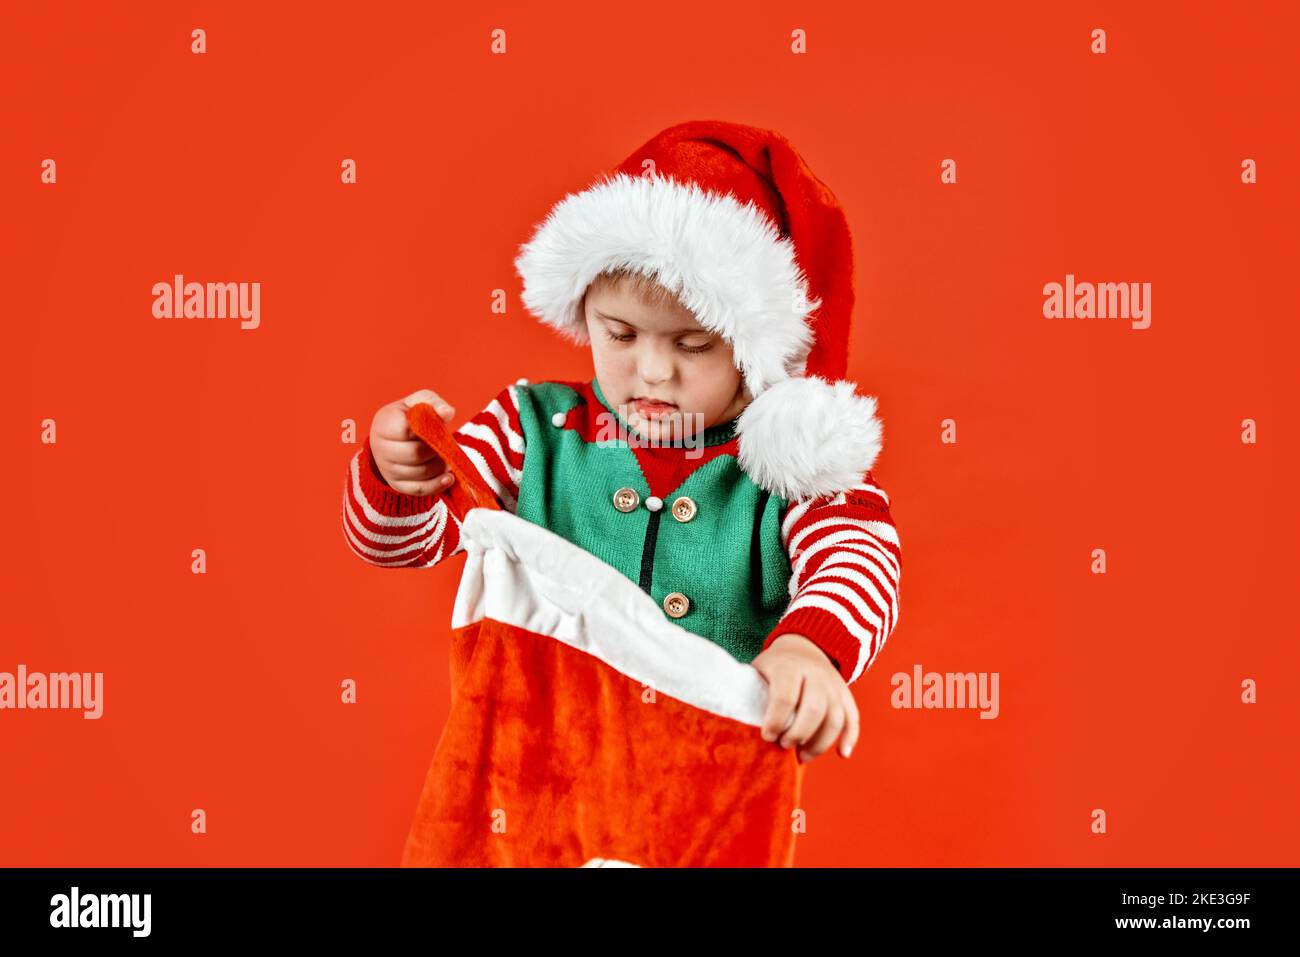 Happy child with Down syndrome in Christmas scarf having fun and laughing in studio. Christmas mood. happy new year. Portrait on red background Stock Photo